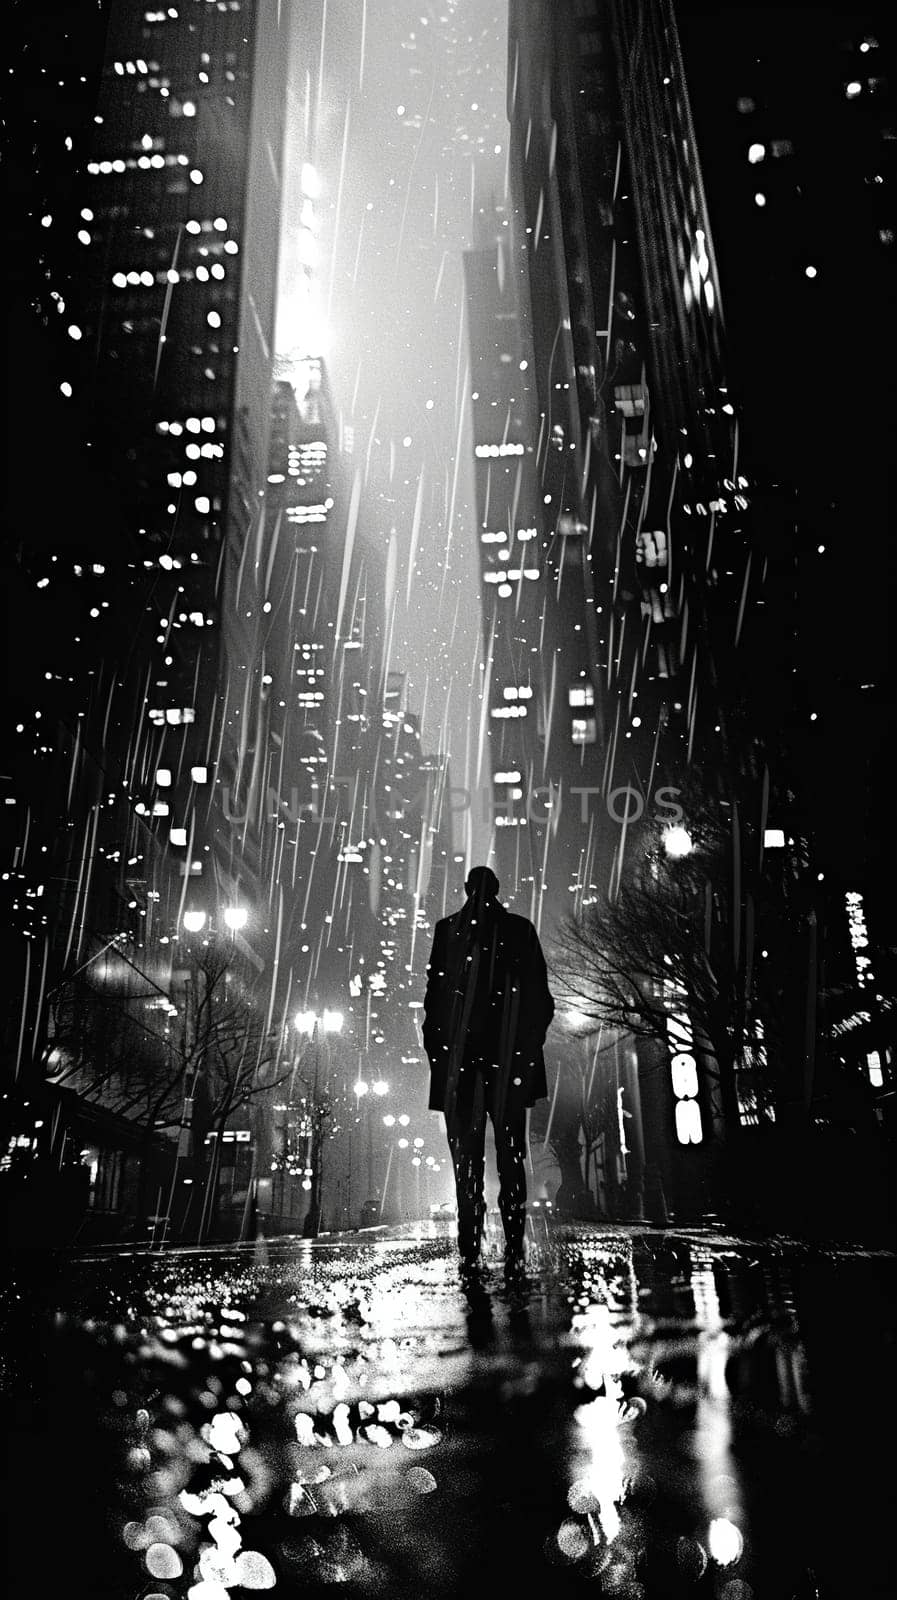 Midnight city walk rendered in a noir comic style, with stark black-and-white contrasts and dramatic shadows.